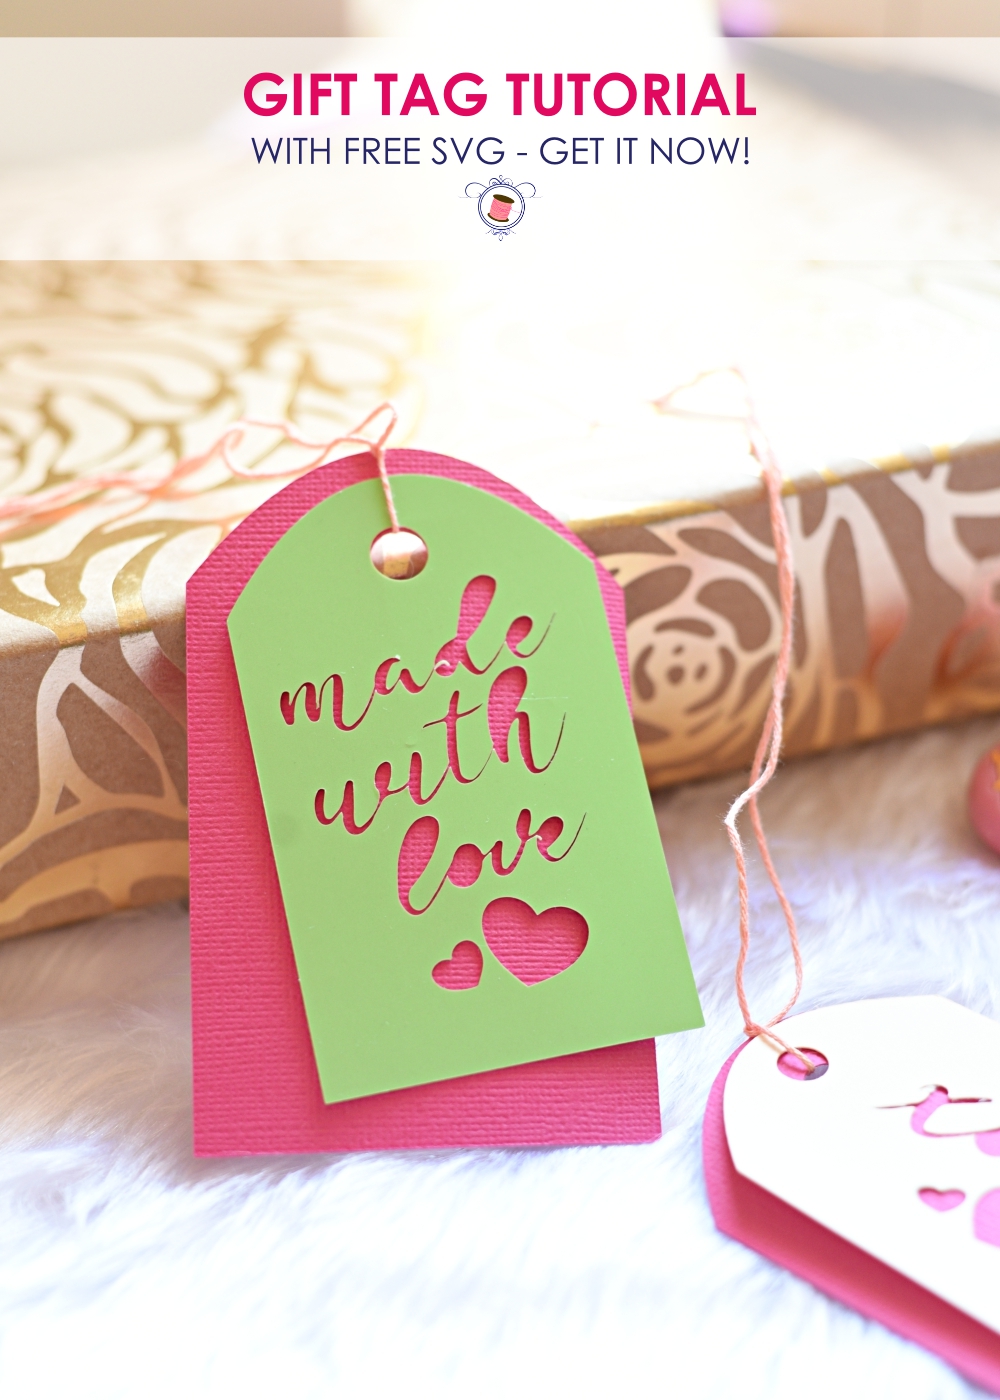 Download 11+ Free Svg Files For Gift Tags Pictures Free SVG files ...